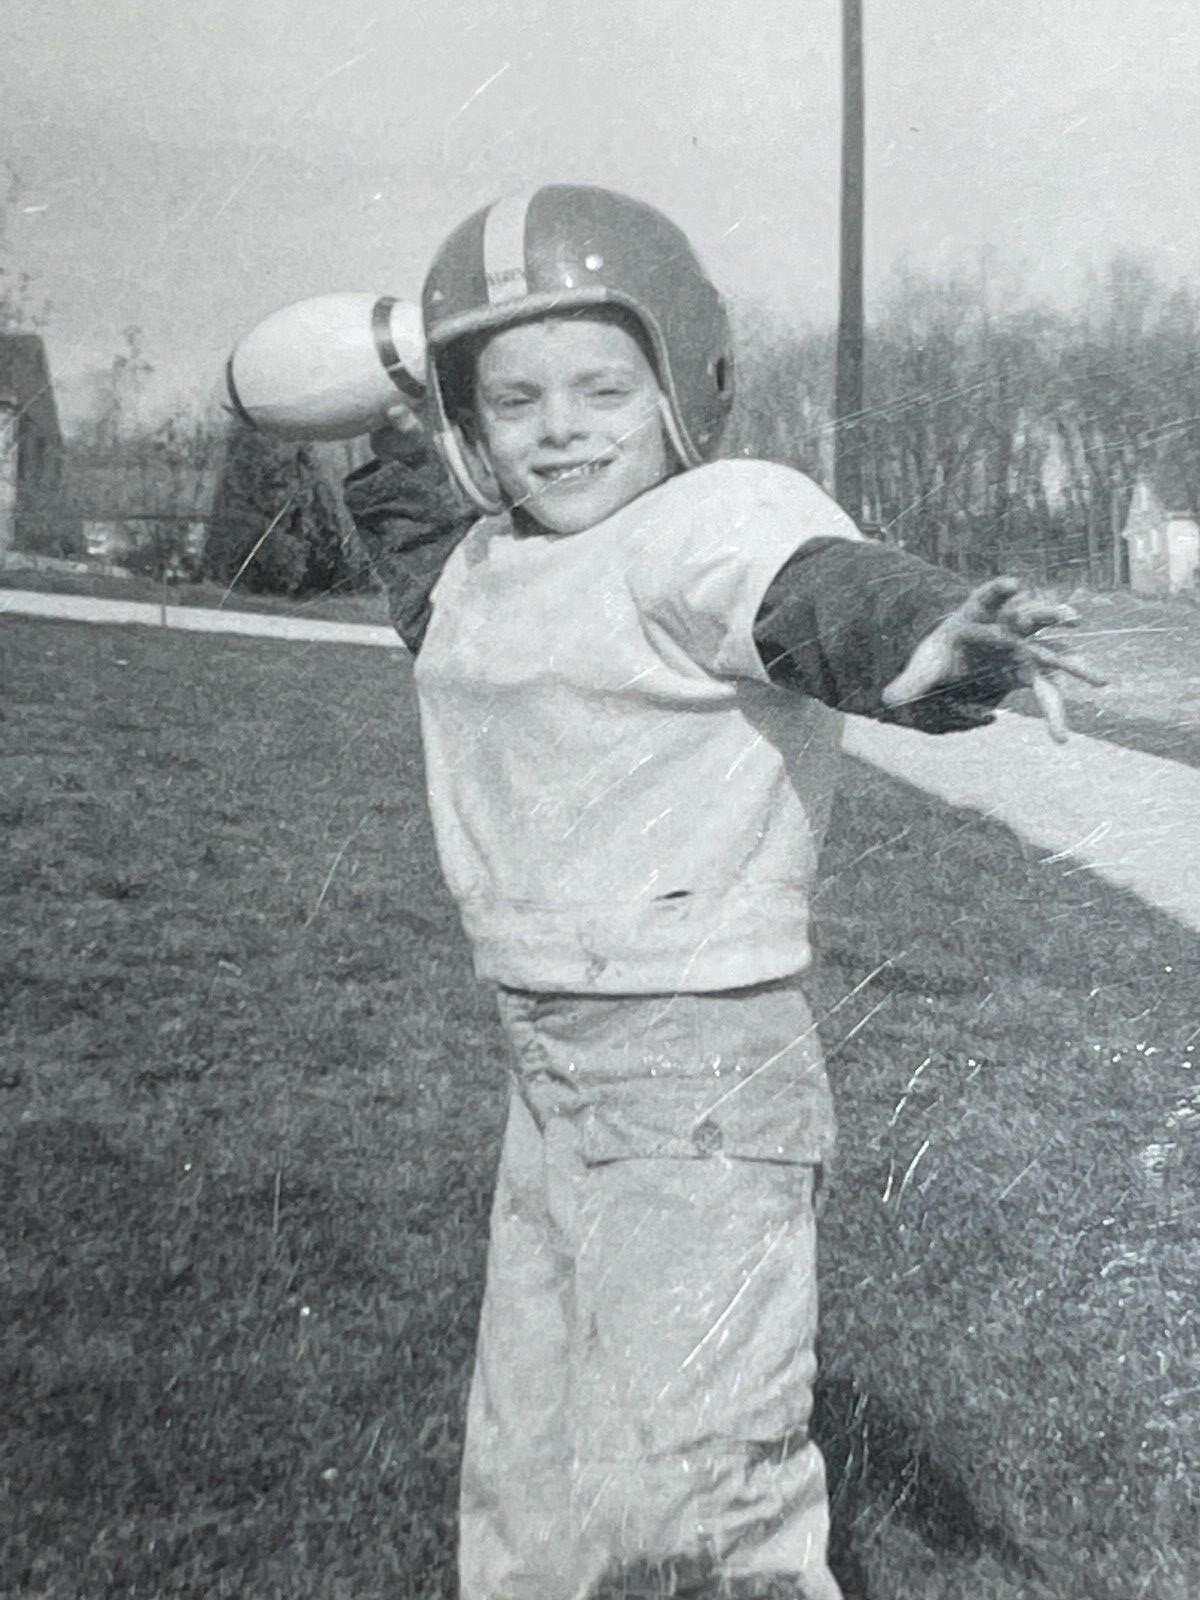 NF Photograph 1957 Boy Throwing Football Front Yard